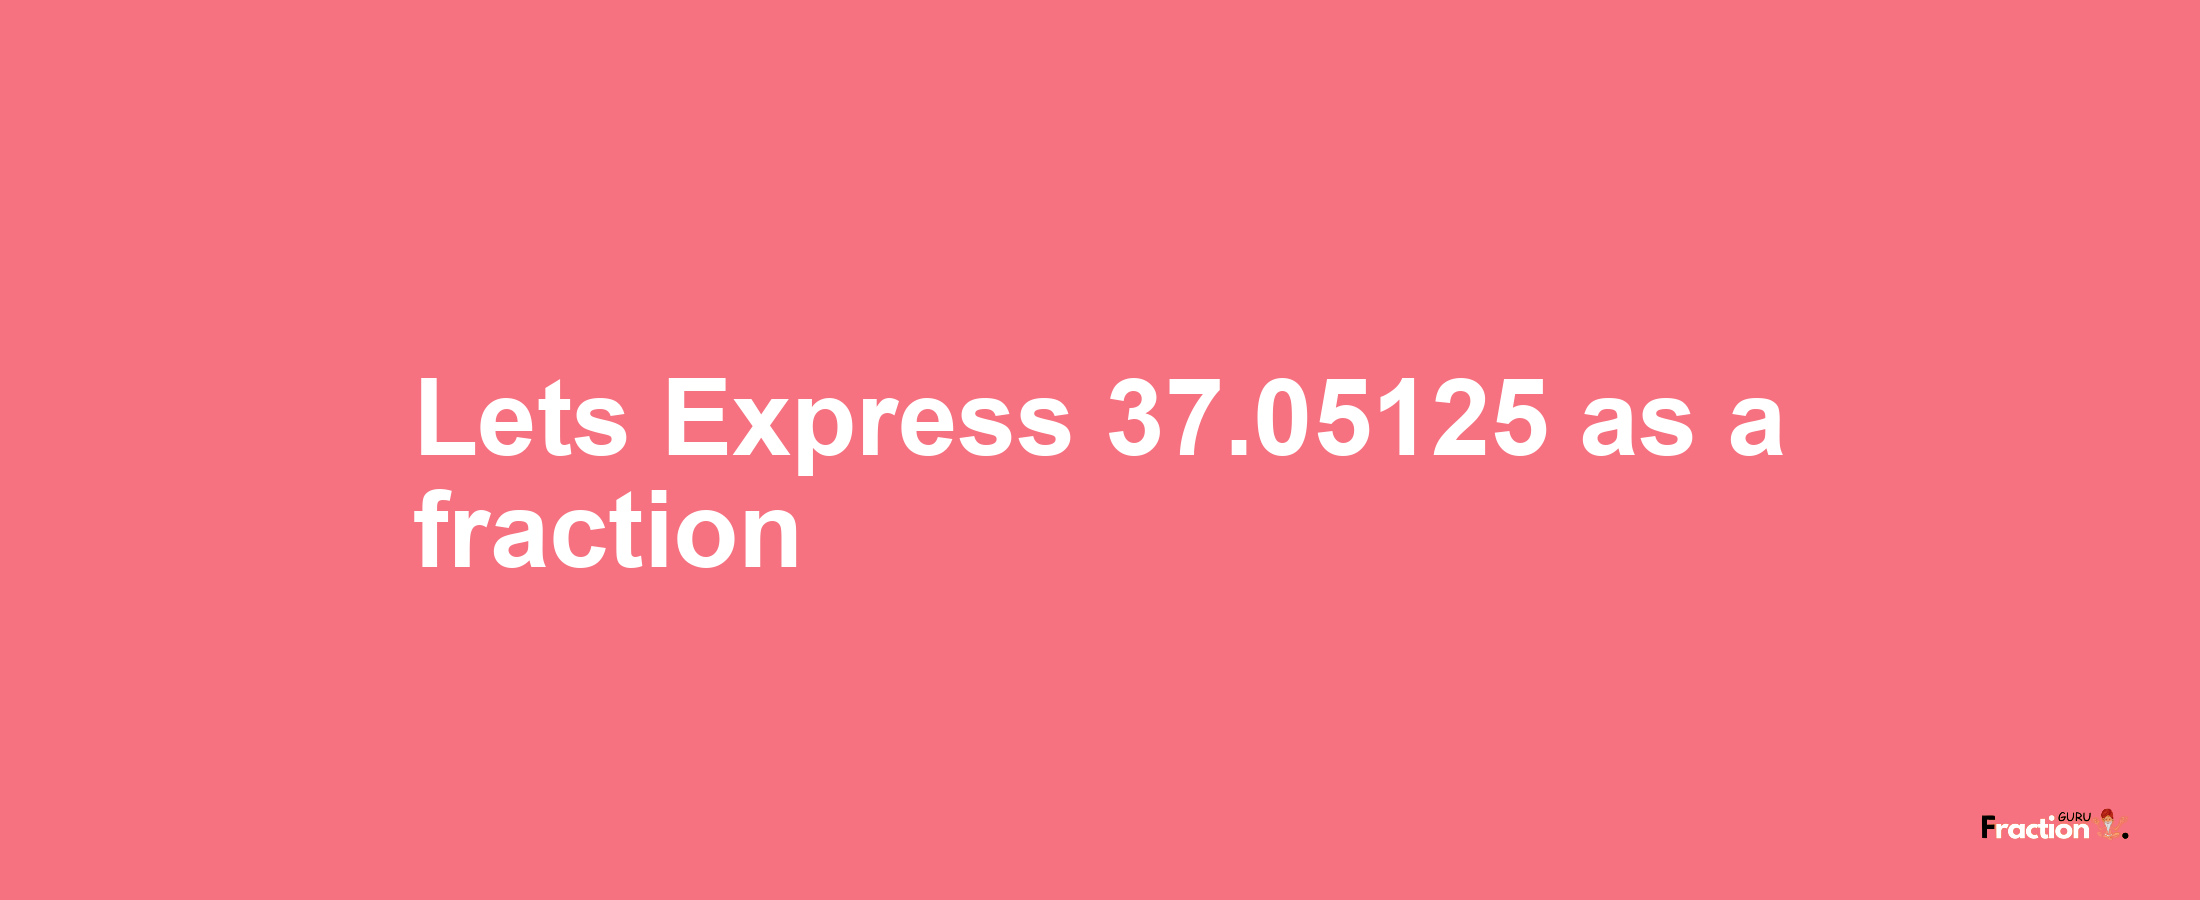 Lets Express 37.05125 as afraction